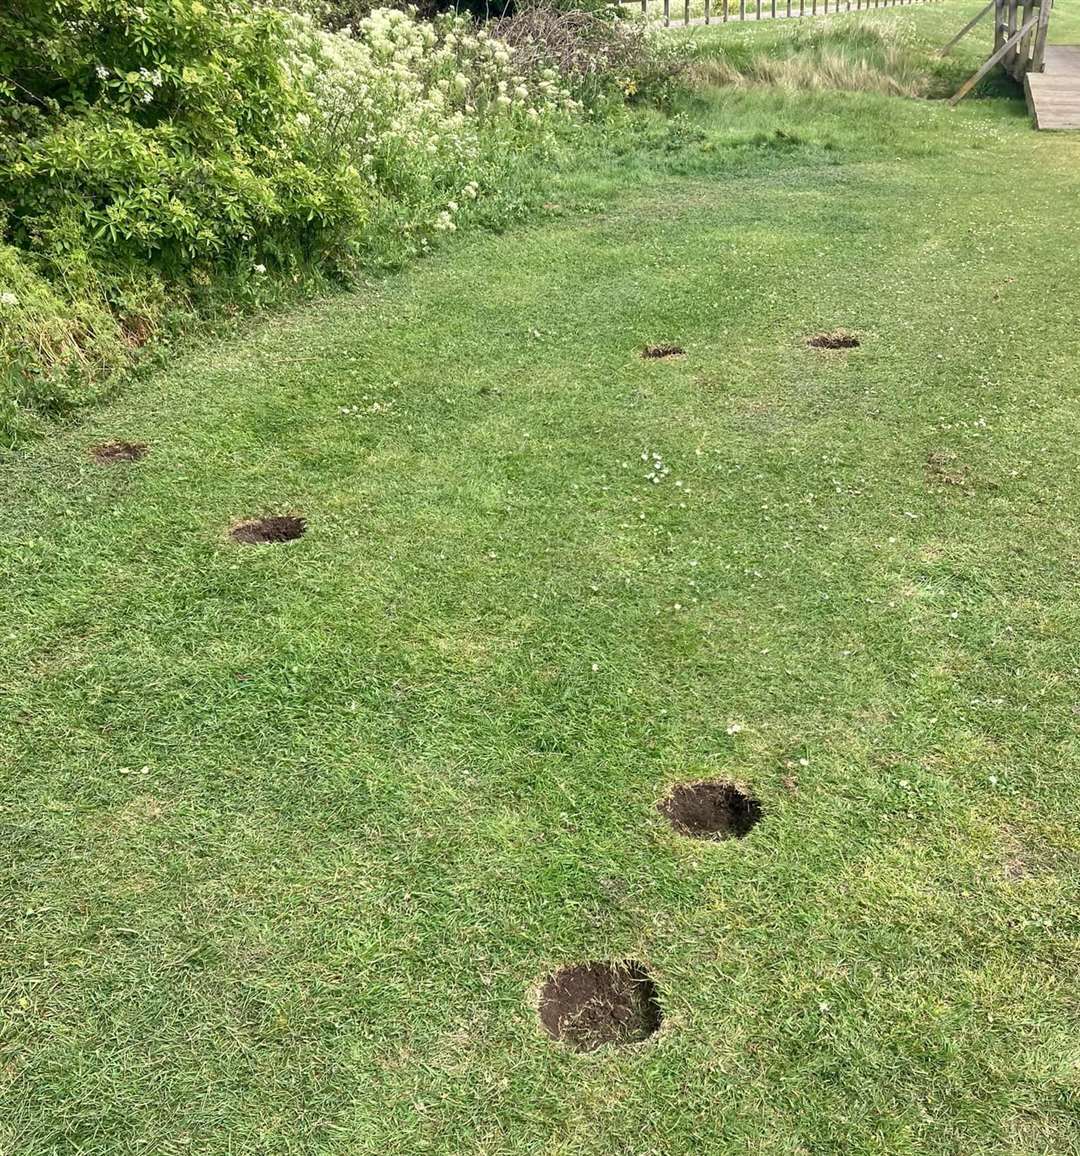 Mystery holes have appeared at Barton's Point Coastal Park, Sheerness